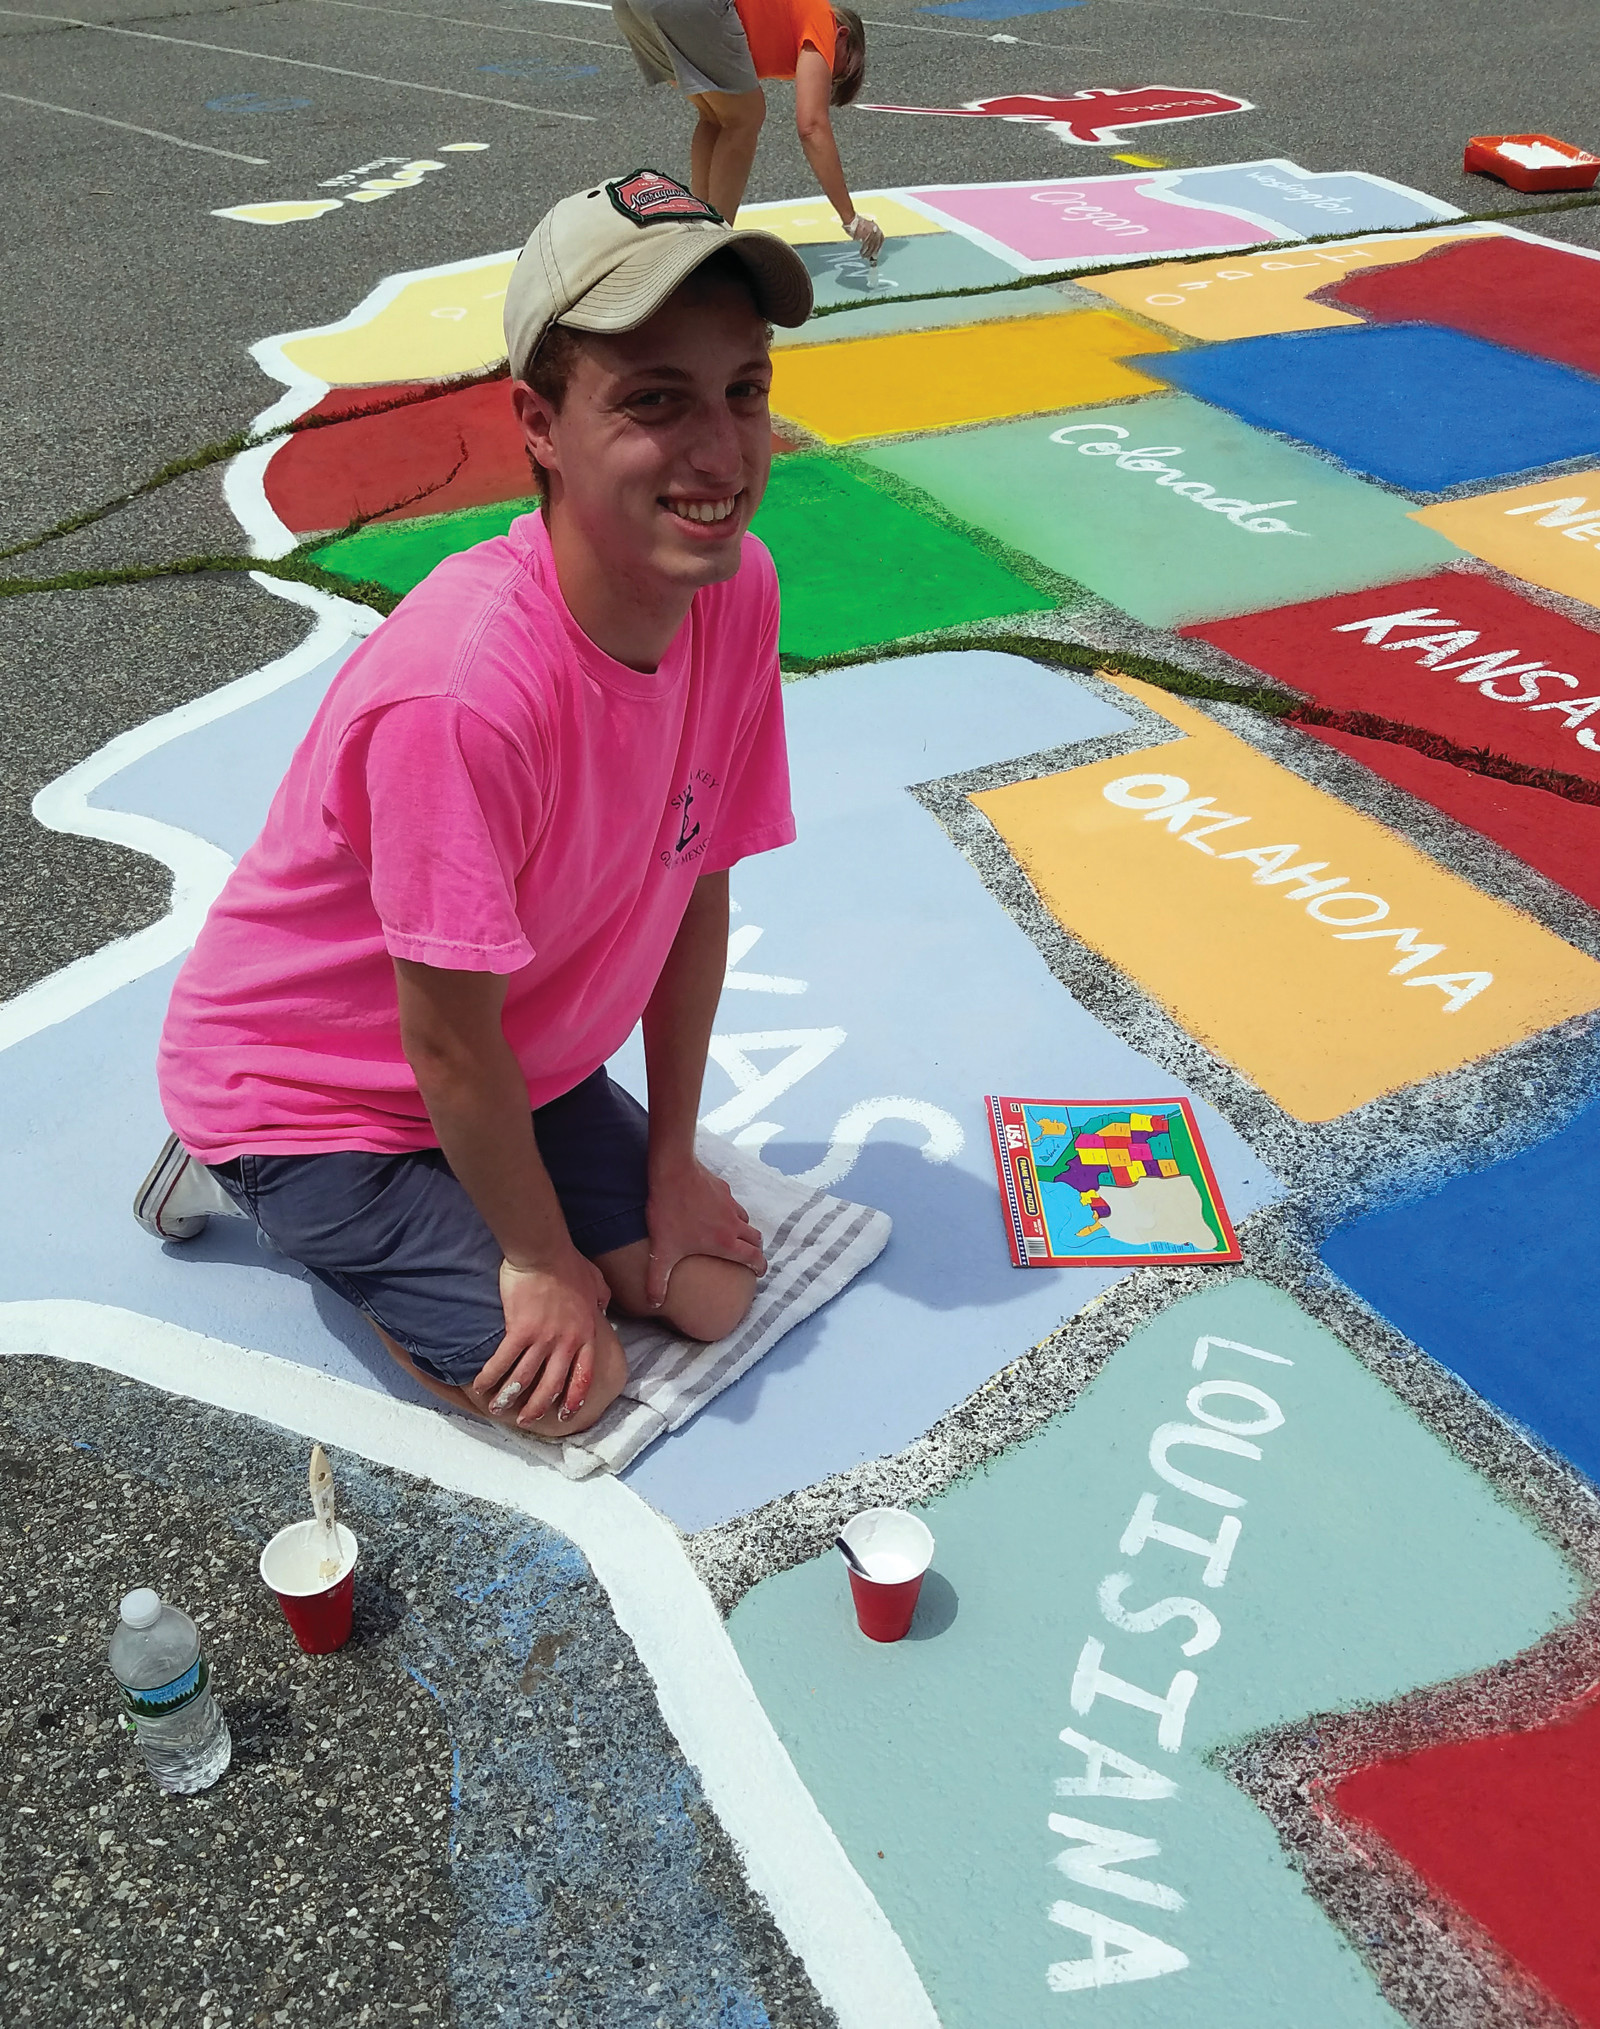 MANY HANDS: Marchetti was able to recruit many of his friends and family to come out on one of the hottest days of the month so far, to paint the blacktop with bright colors and designs for the students at Woodridge School.